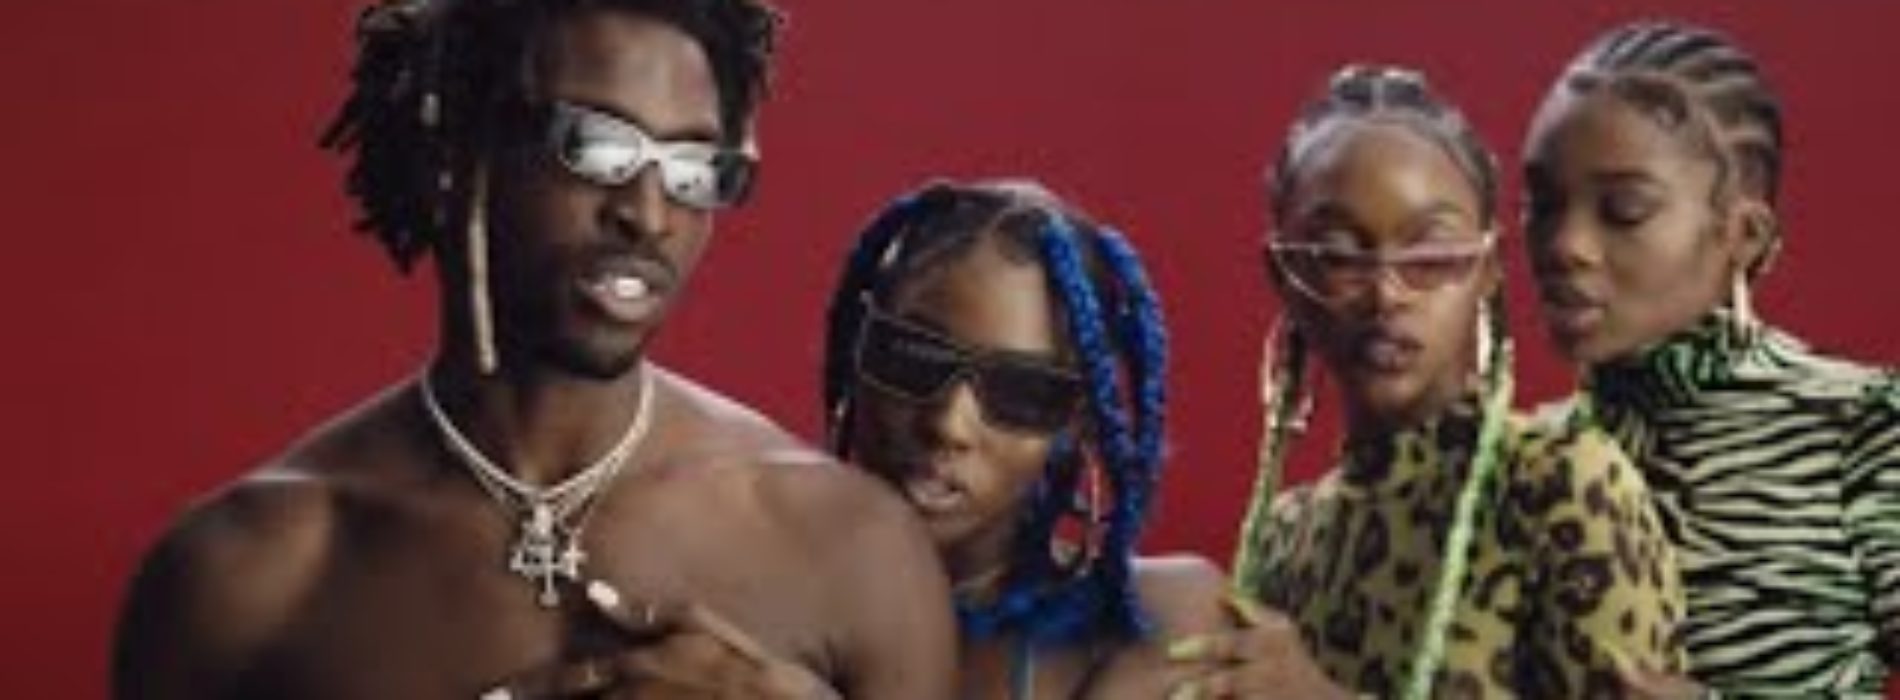 SAINt JHN – « Monica Lewinsky, Election Year » ft. DaBaby & A Boogie wit da Hoodie (Official Video) – Novembre 2020